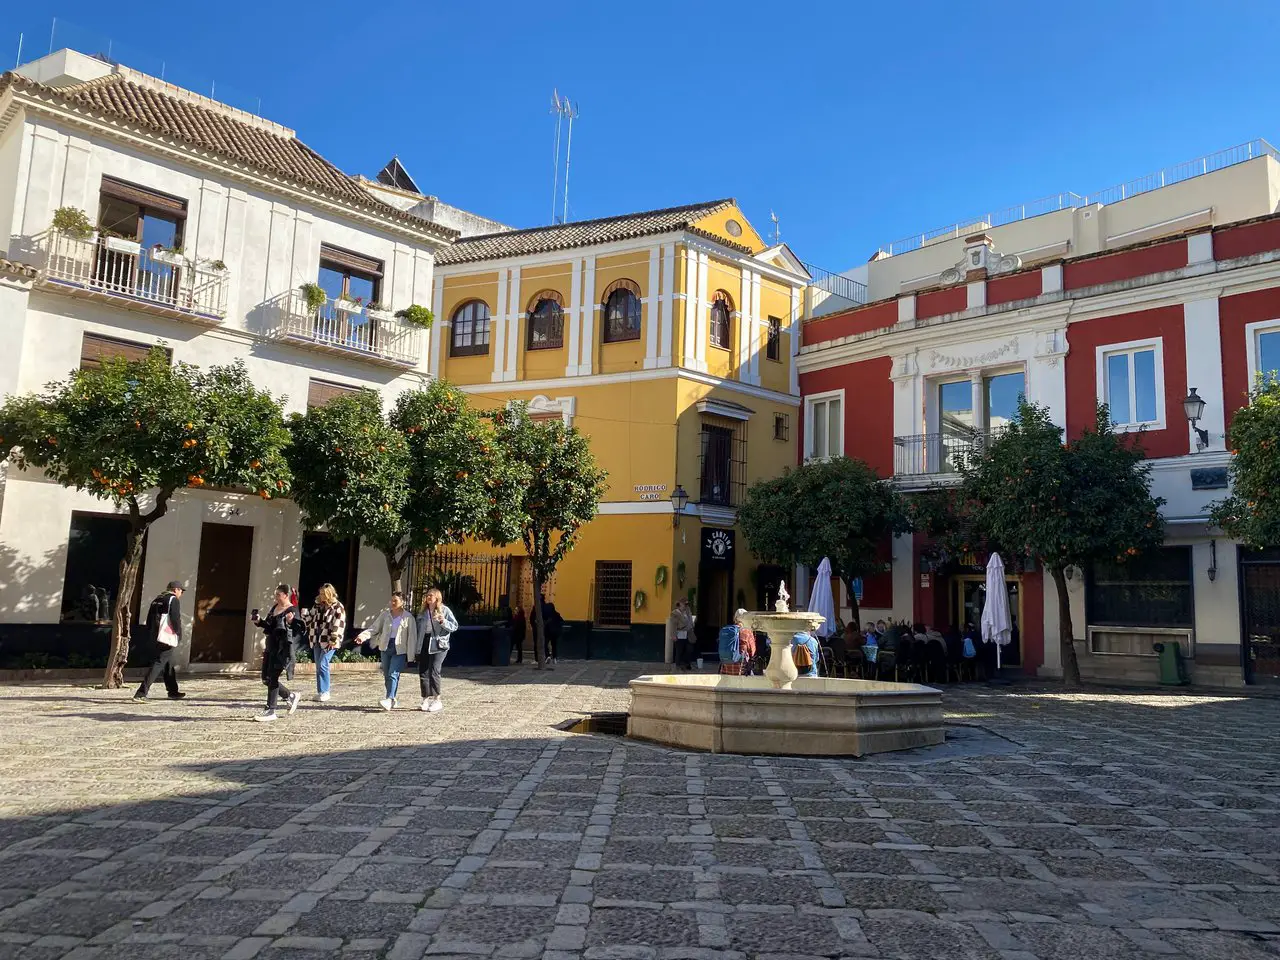 Colourful buildings in Andalucía, Spain